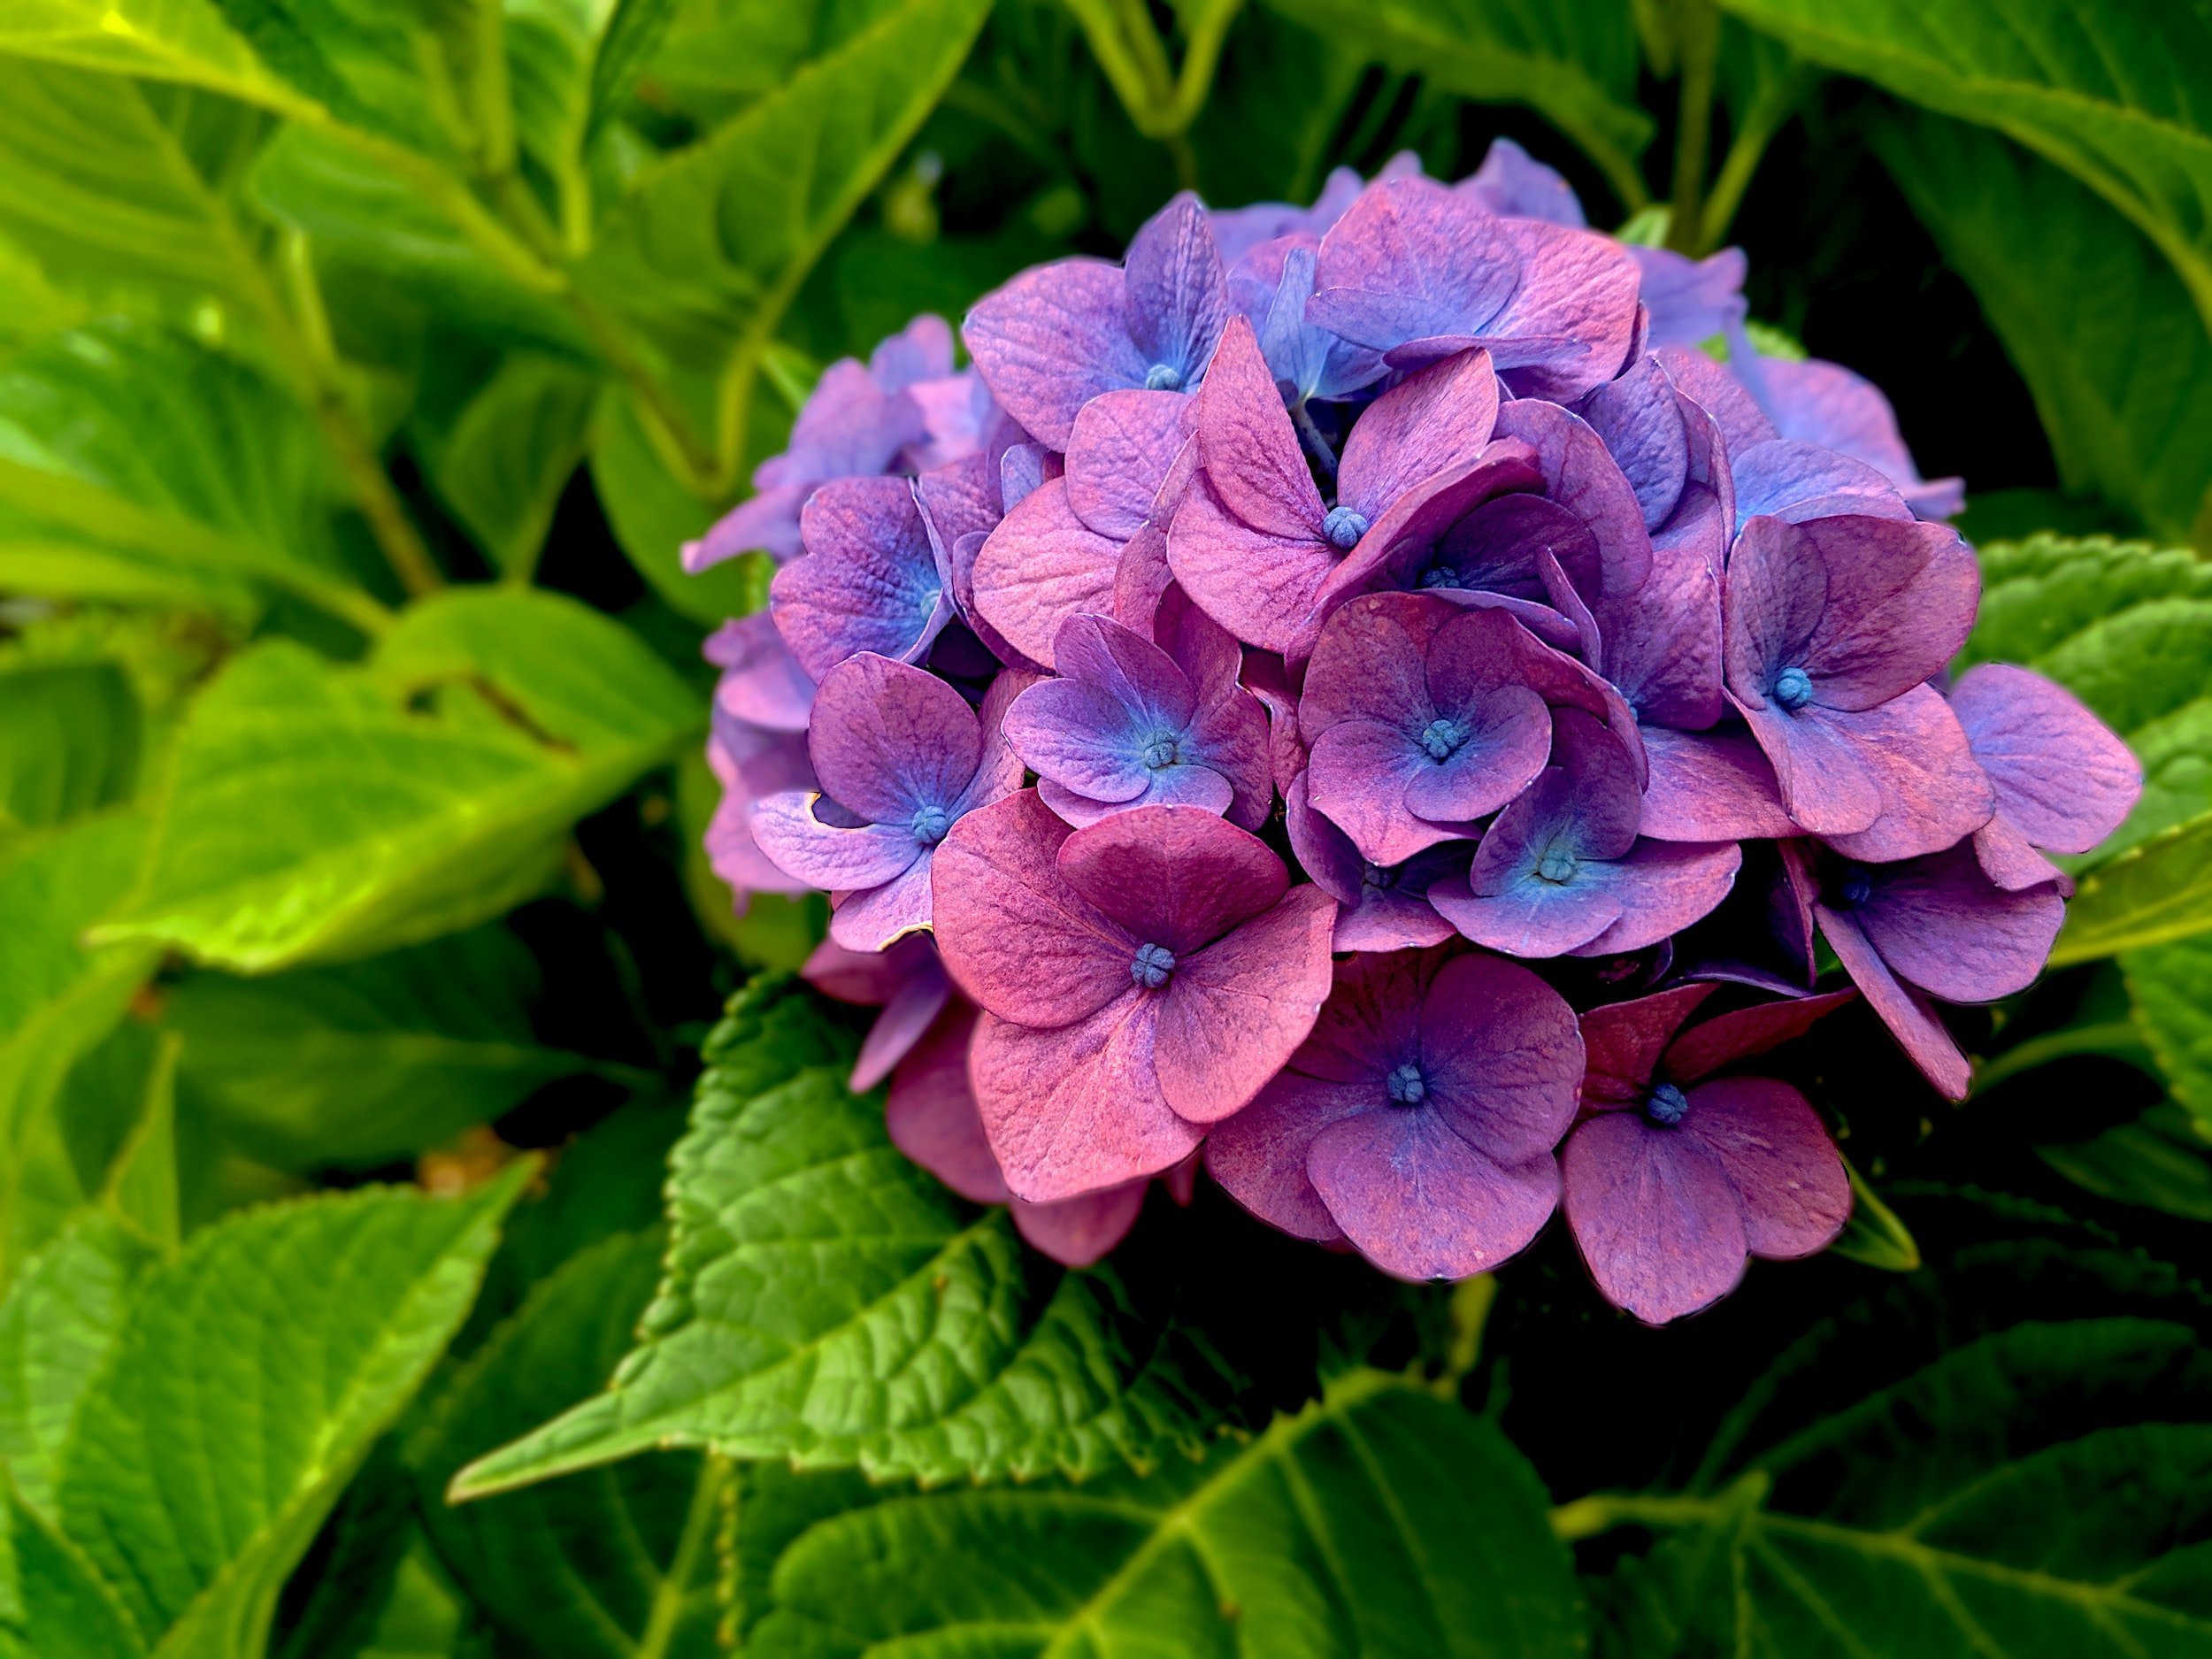 Image of Hydrangea flower showing signs of nutrient deficiency